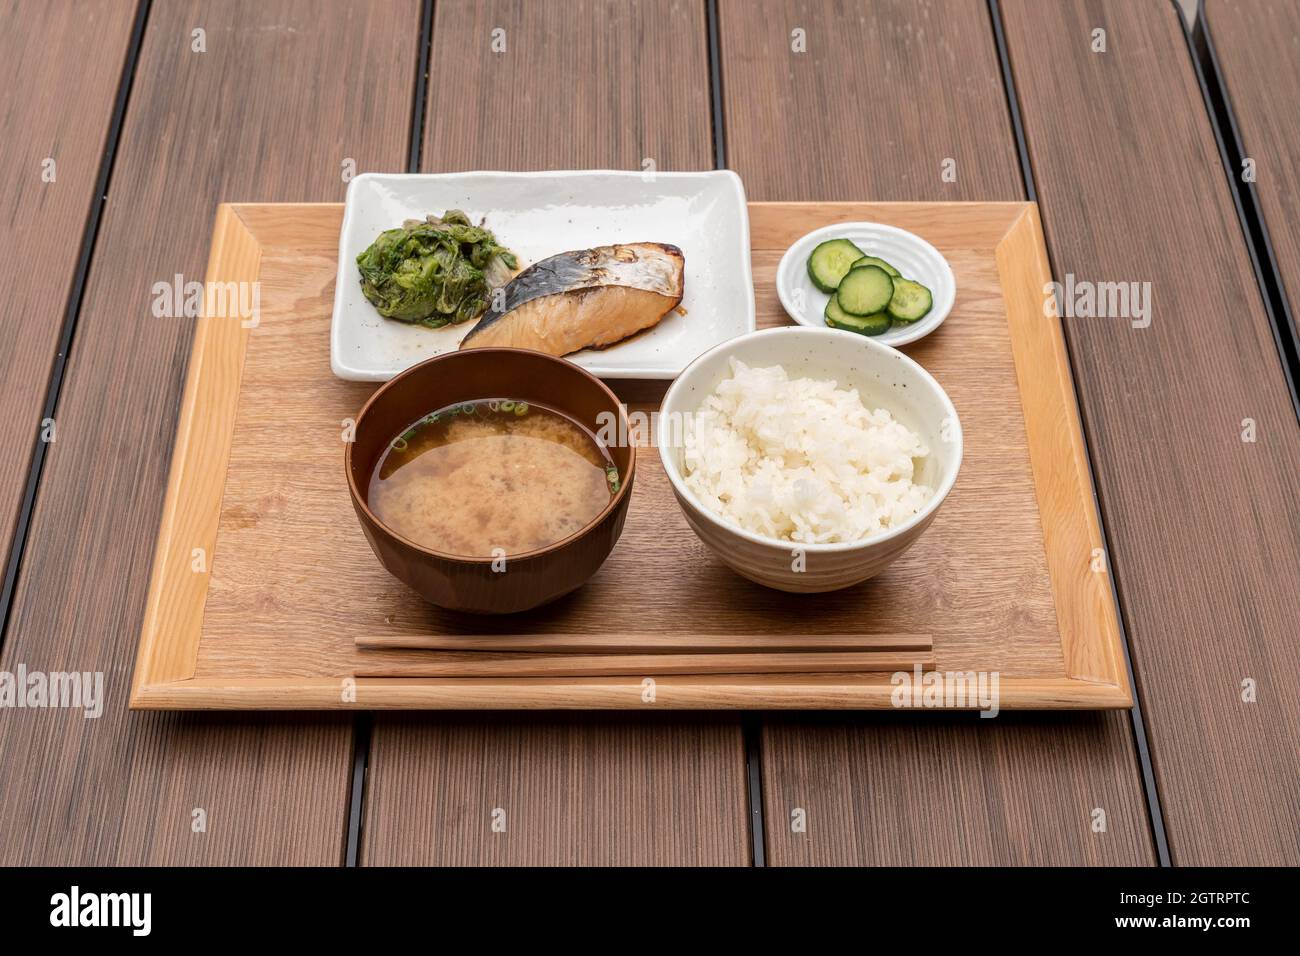 High Angle View Of Japanese Breakfast On Table Stock Photo